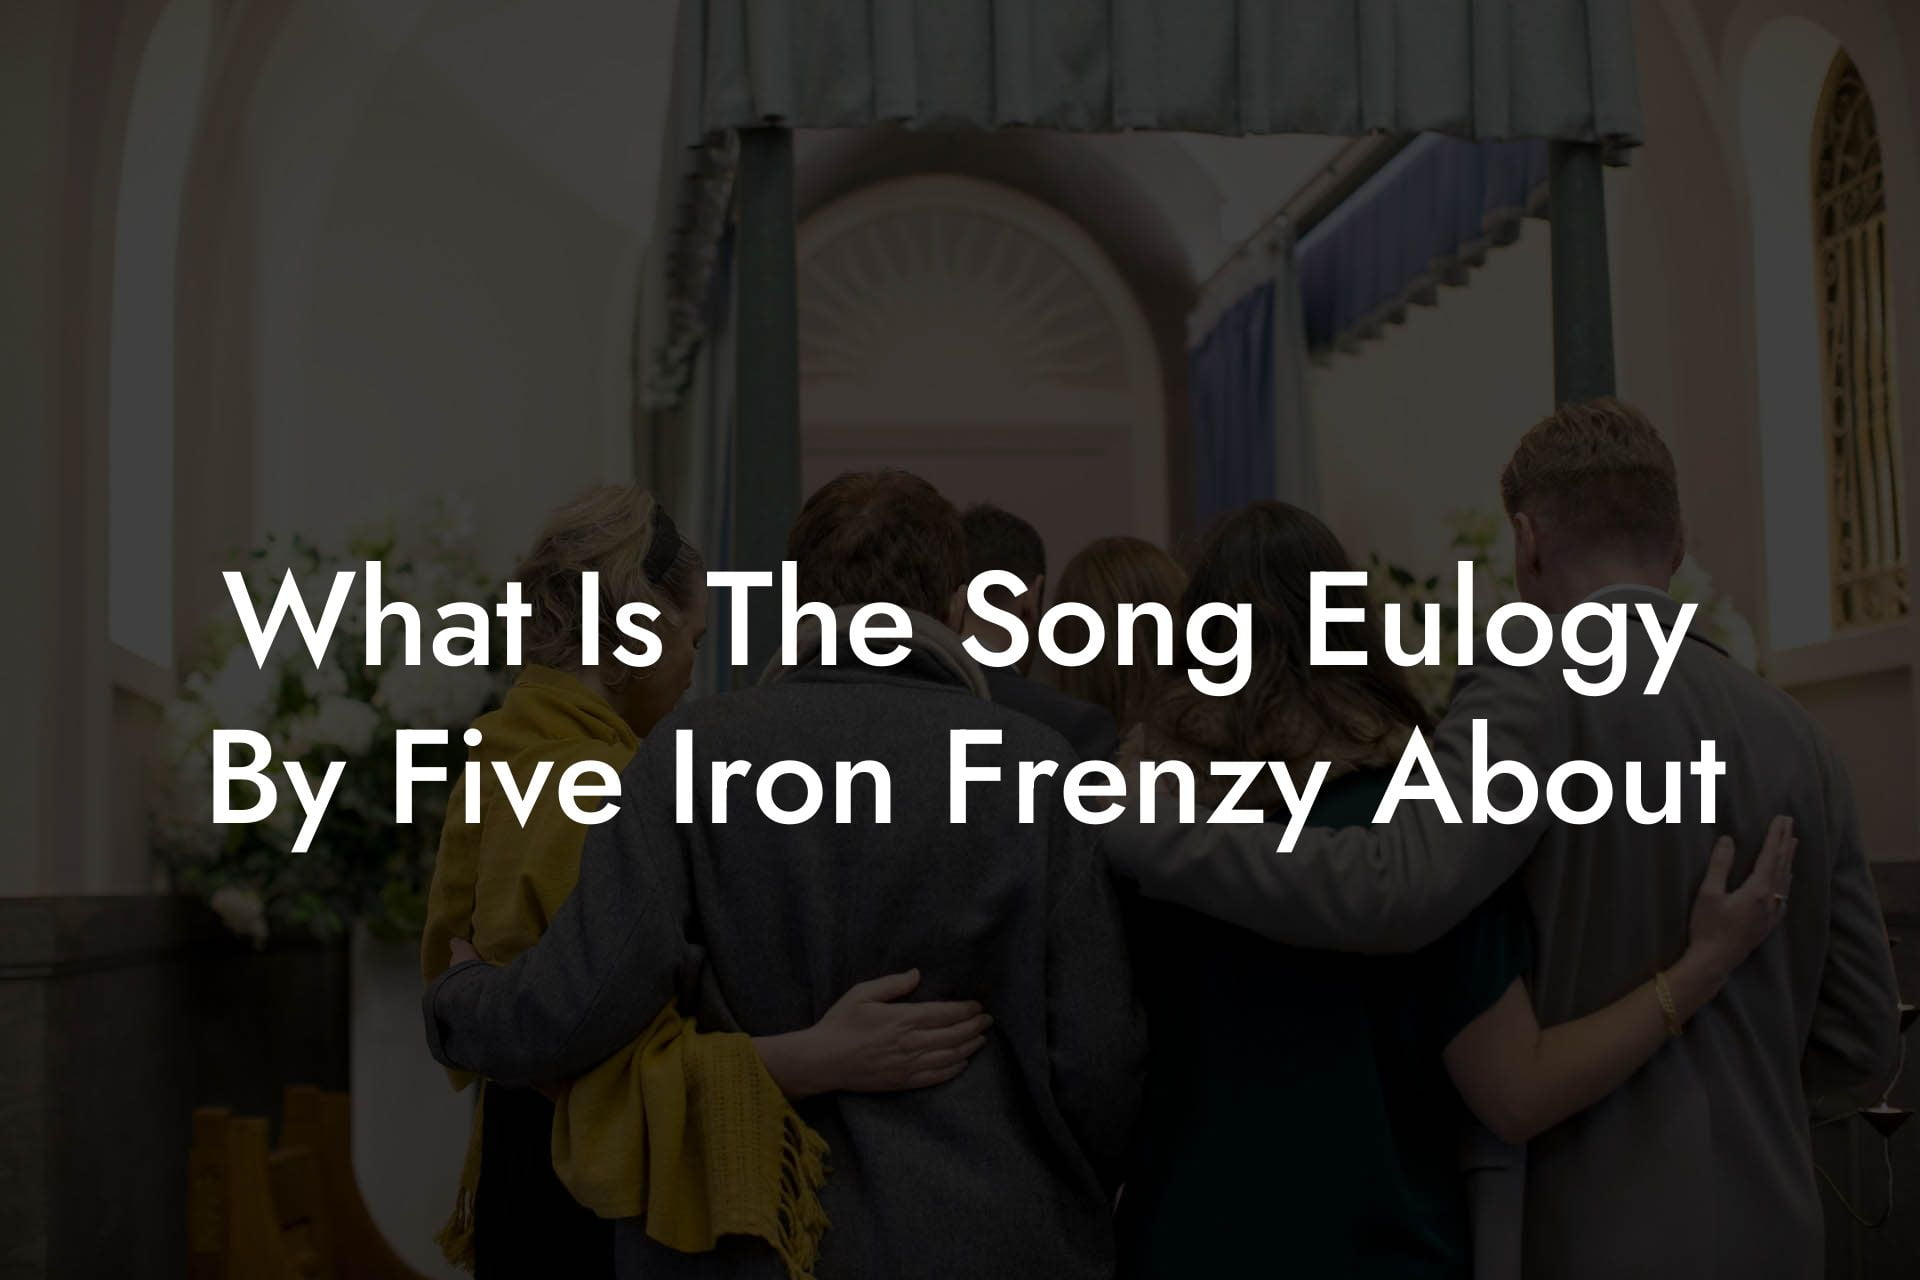 What Is The Song Eulogy By Five Iron Frenzy About